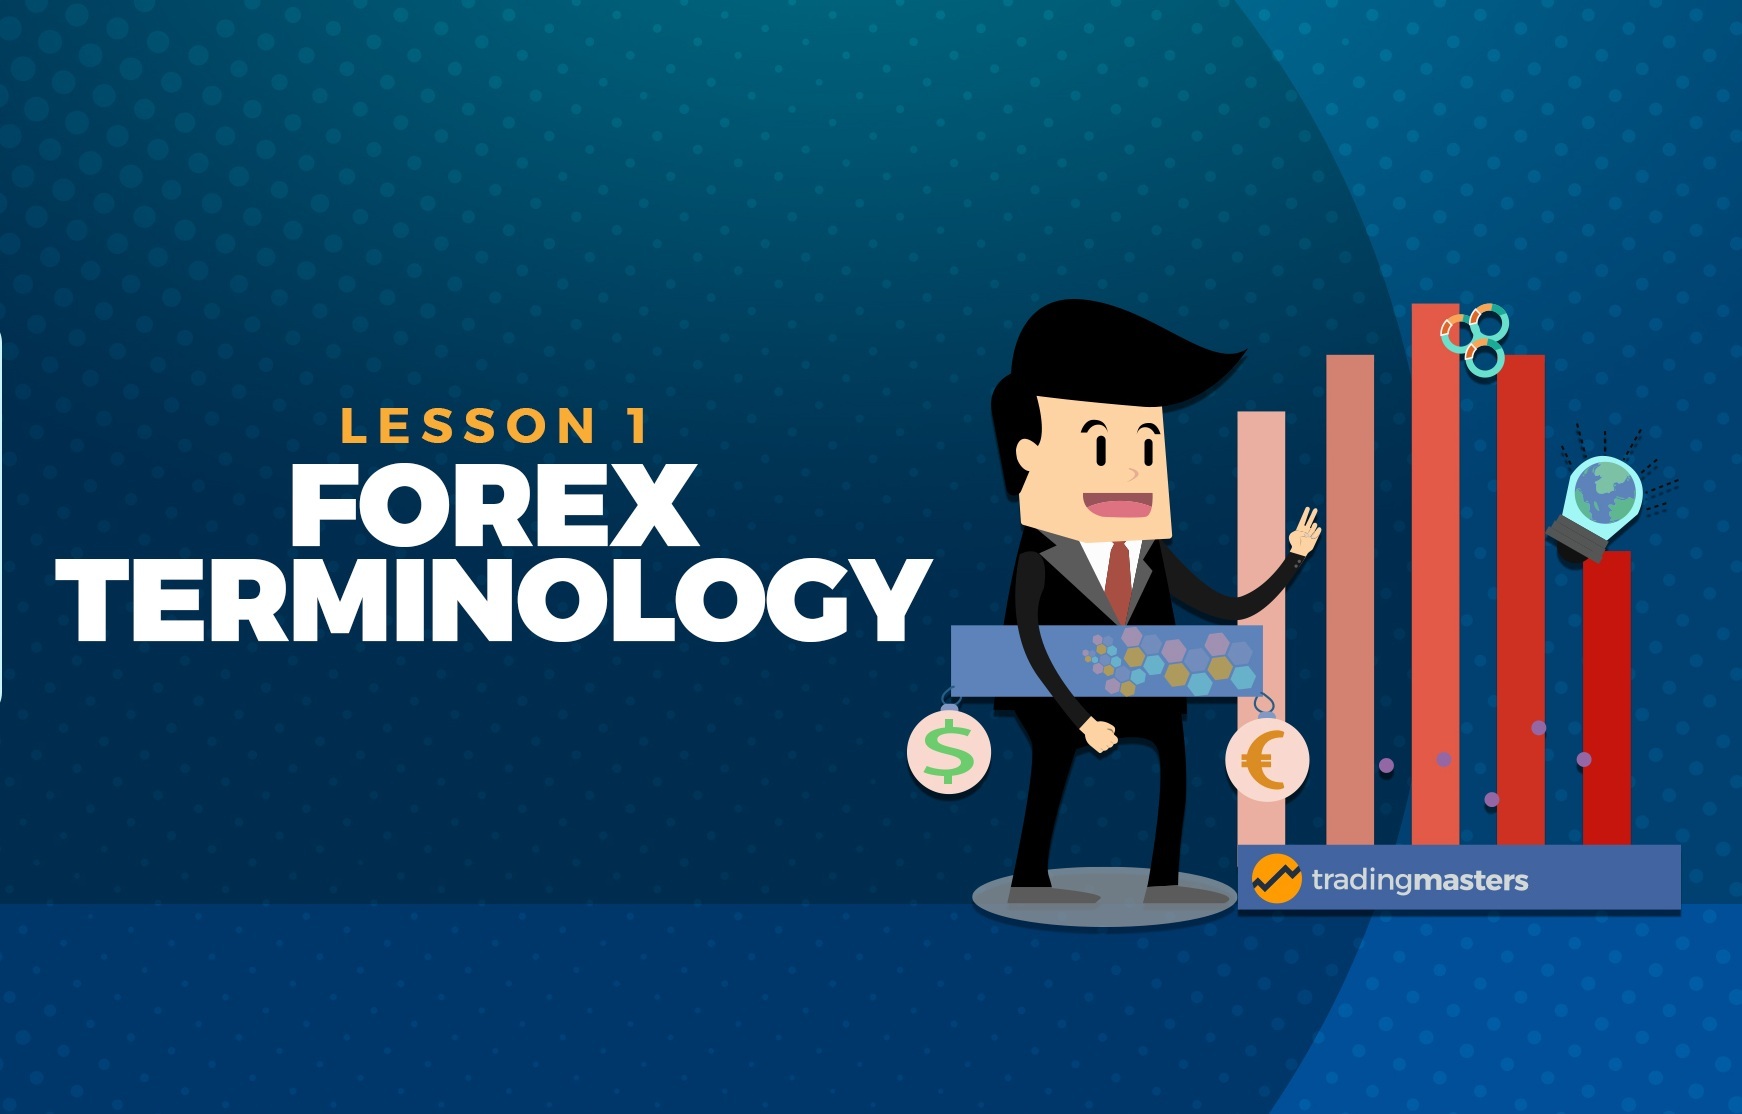 Basic Forex Terminology You Need to Know